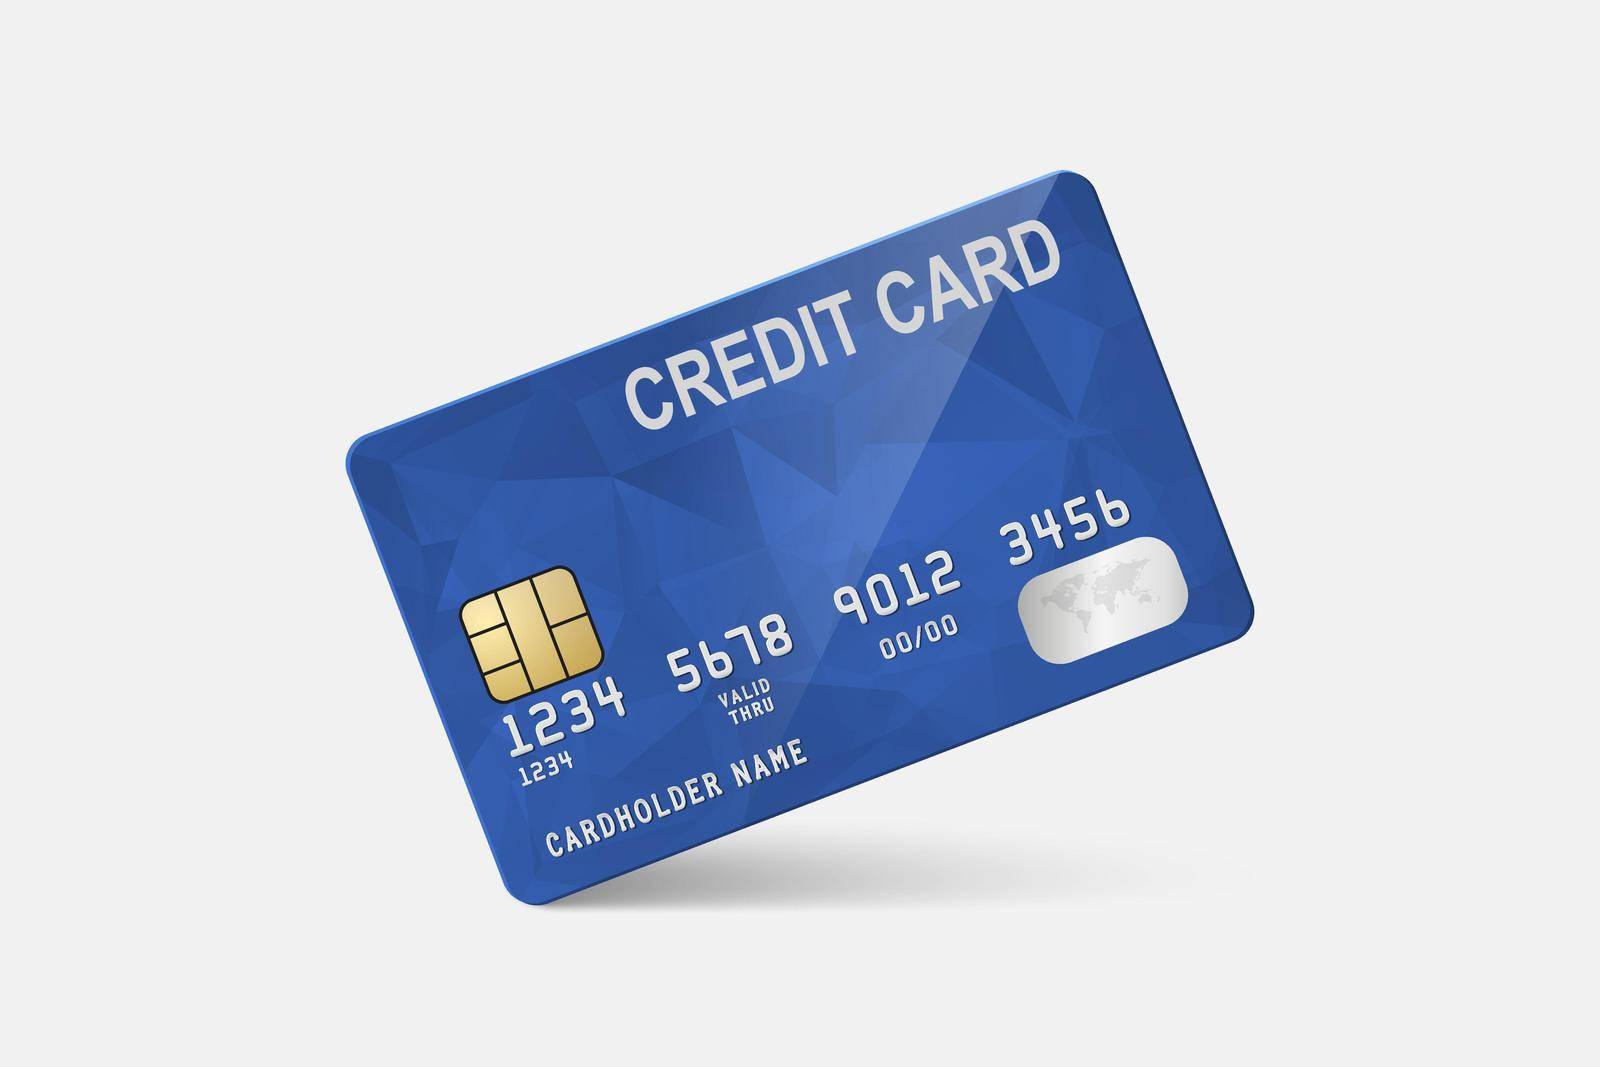 Vector 3d Realistic Blue Credit Card on White Background. Design Template of Plastic Credit or Debit Card. Credit Card Payment Concept. Front View.